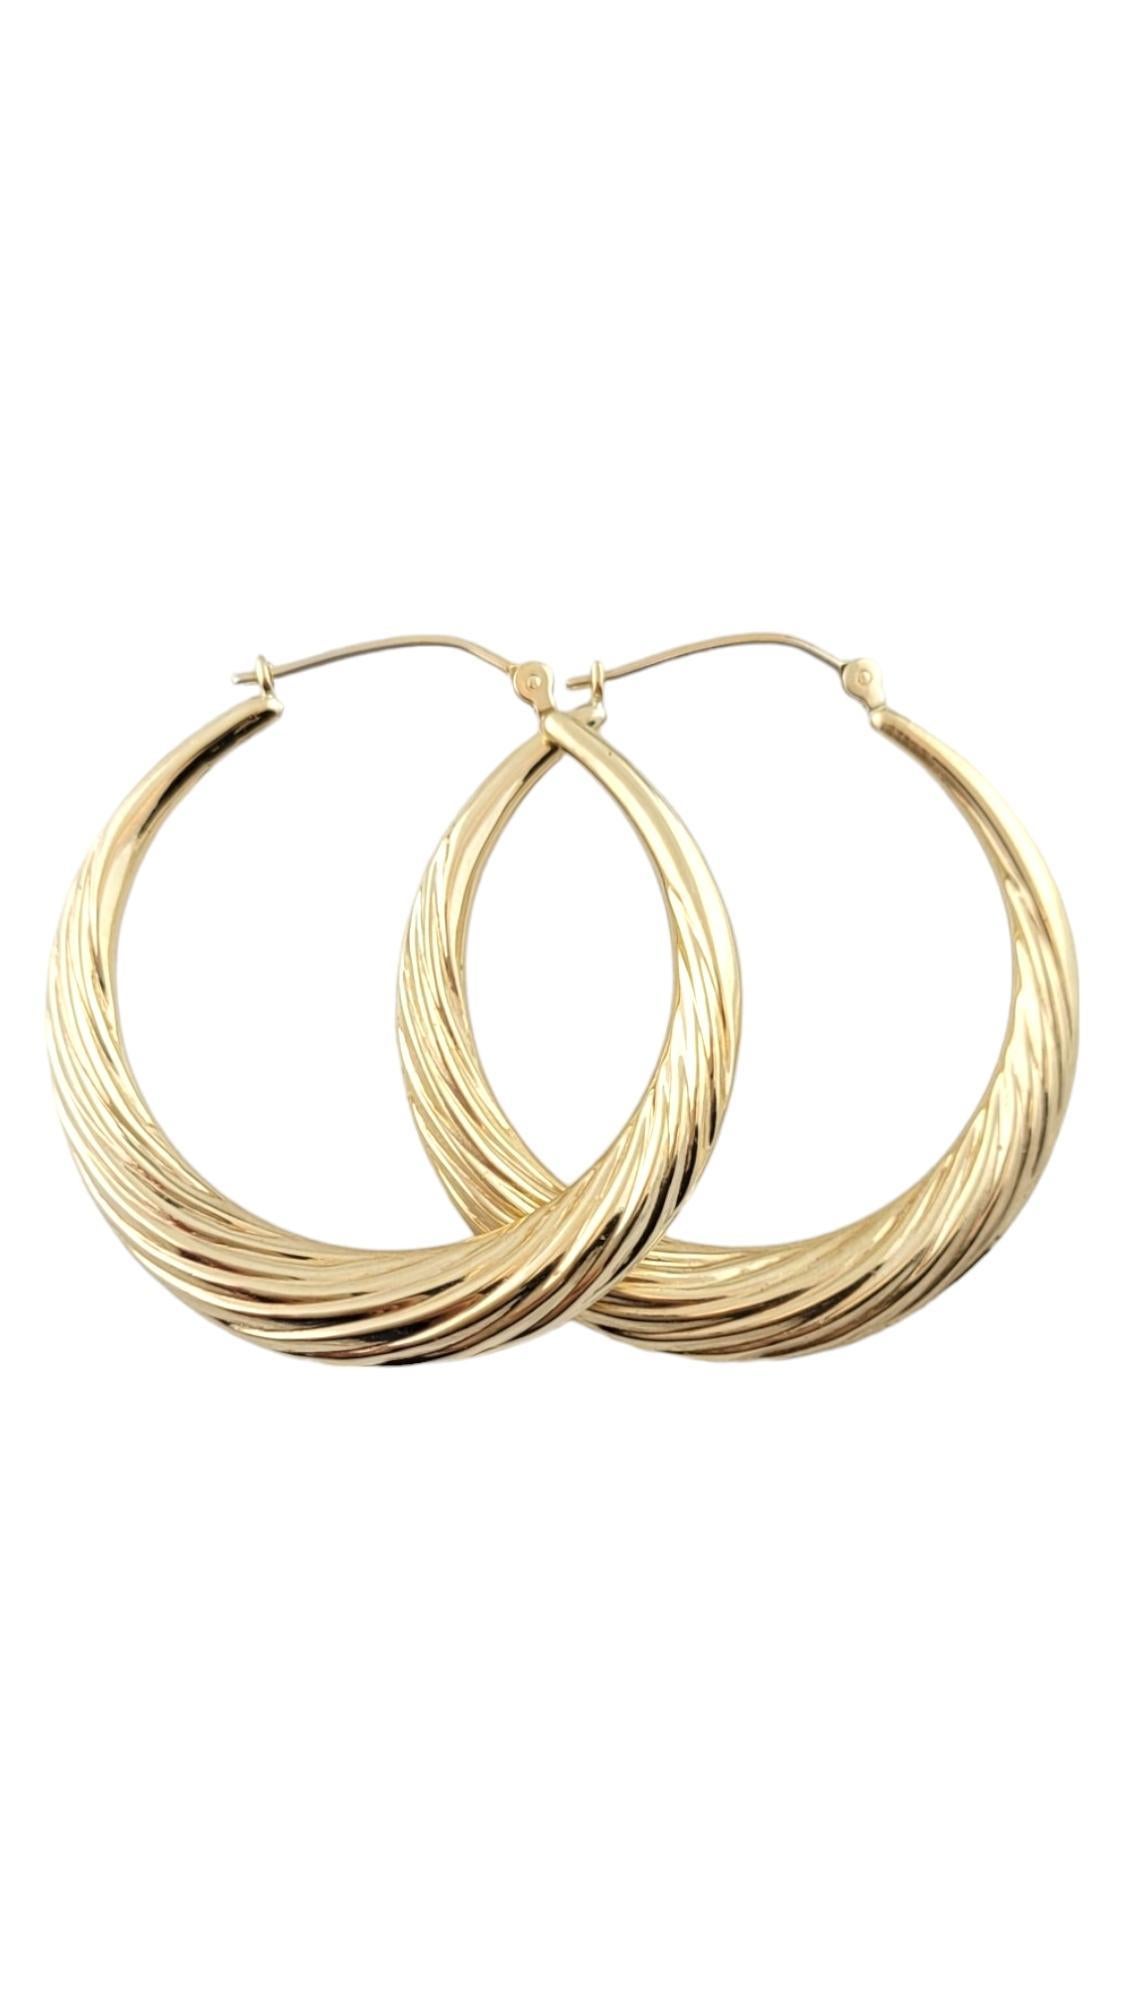 Vintage 14K Yellow Gold Twist Hoop Earrings

This gorgeous set of 14K gold hoops are in a beautiful, twisted pattern that would look amazing on anyone!

Size: 36.3mm X 34.49mm X 4.17mm

Weight: 2.03 dwt/ 3.16 g

Hallmark: 14K MB

Very good